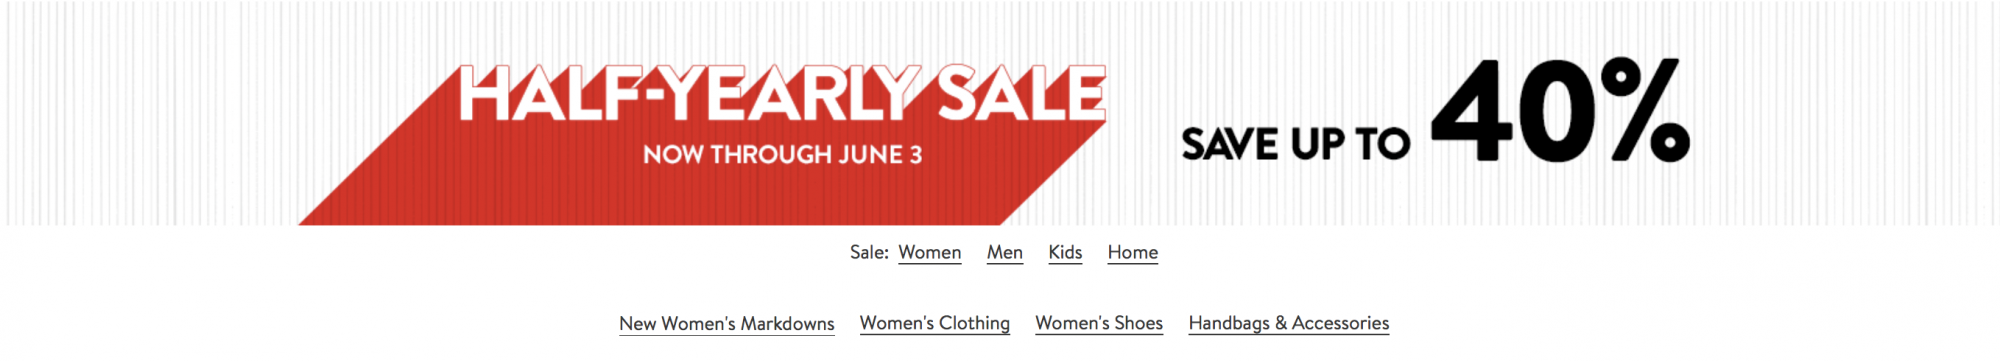 Nordstrom Half-Yearly Sale